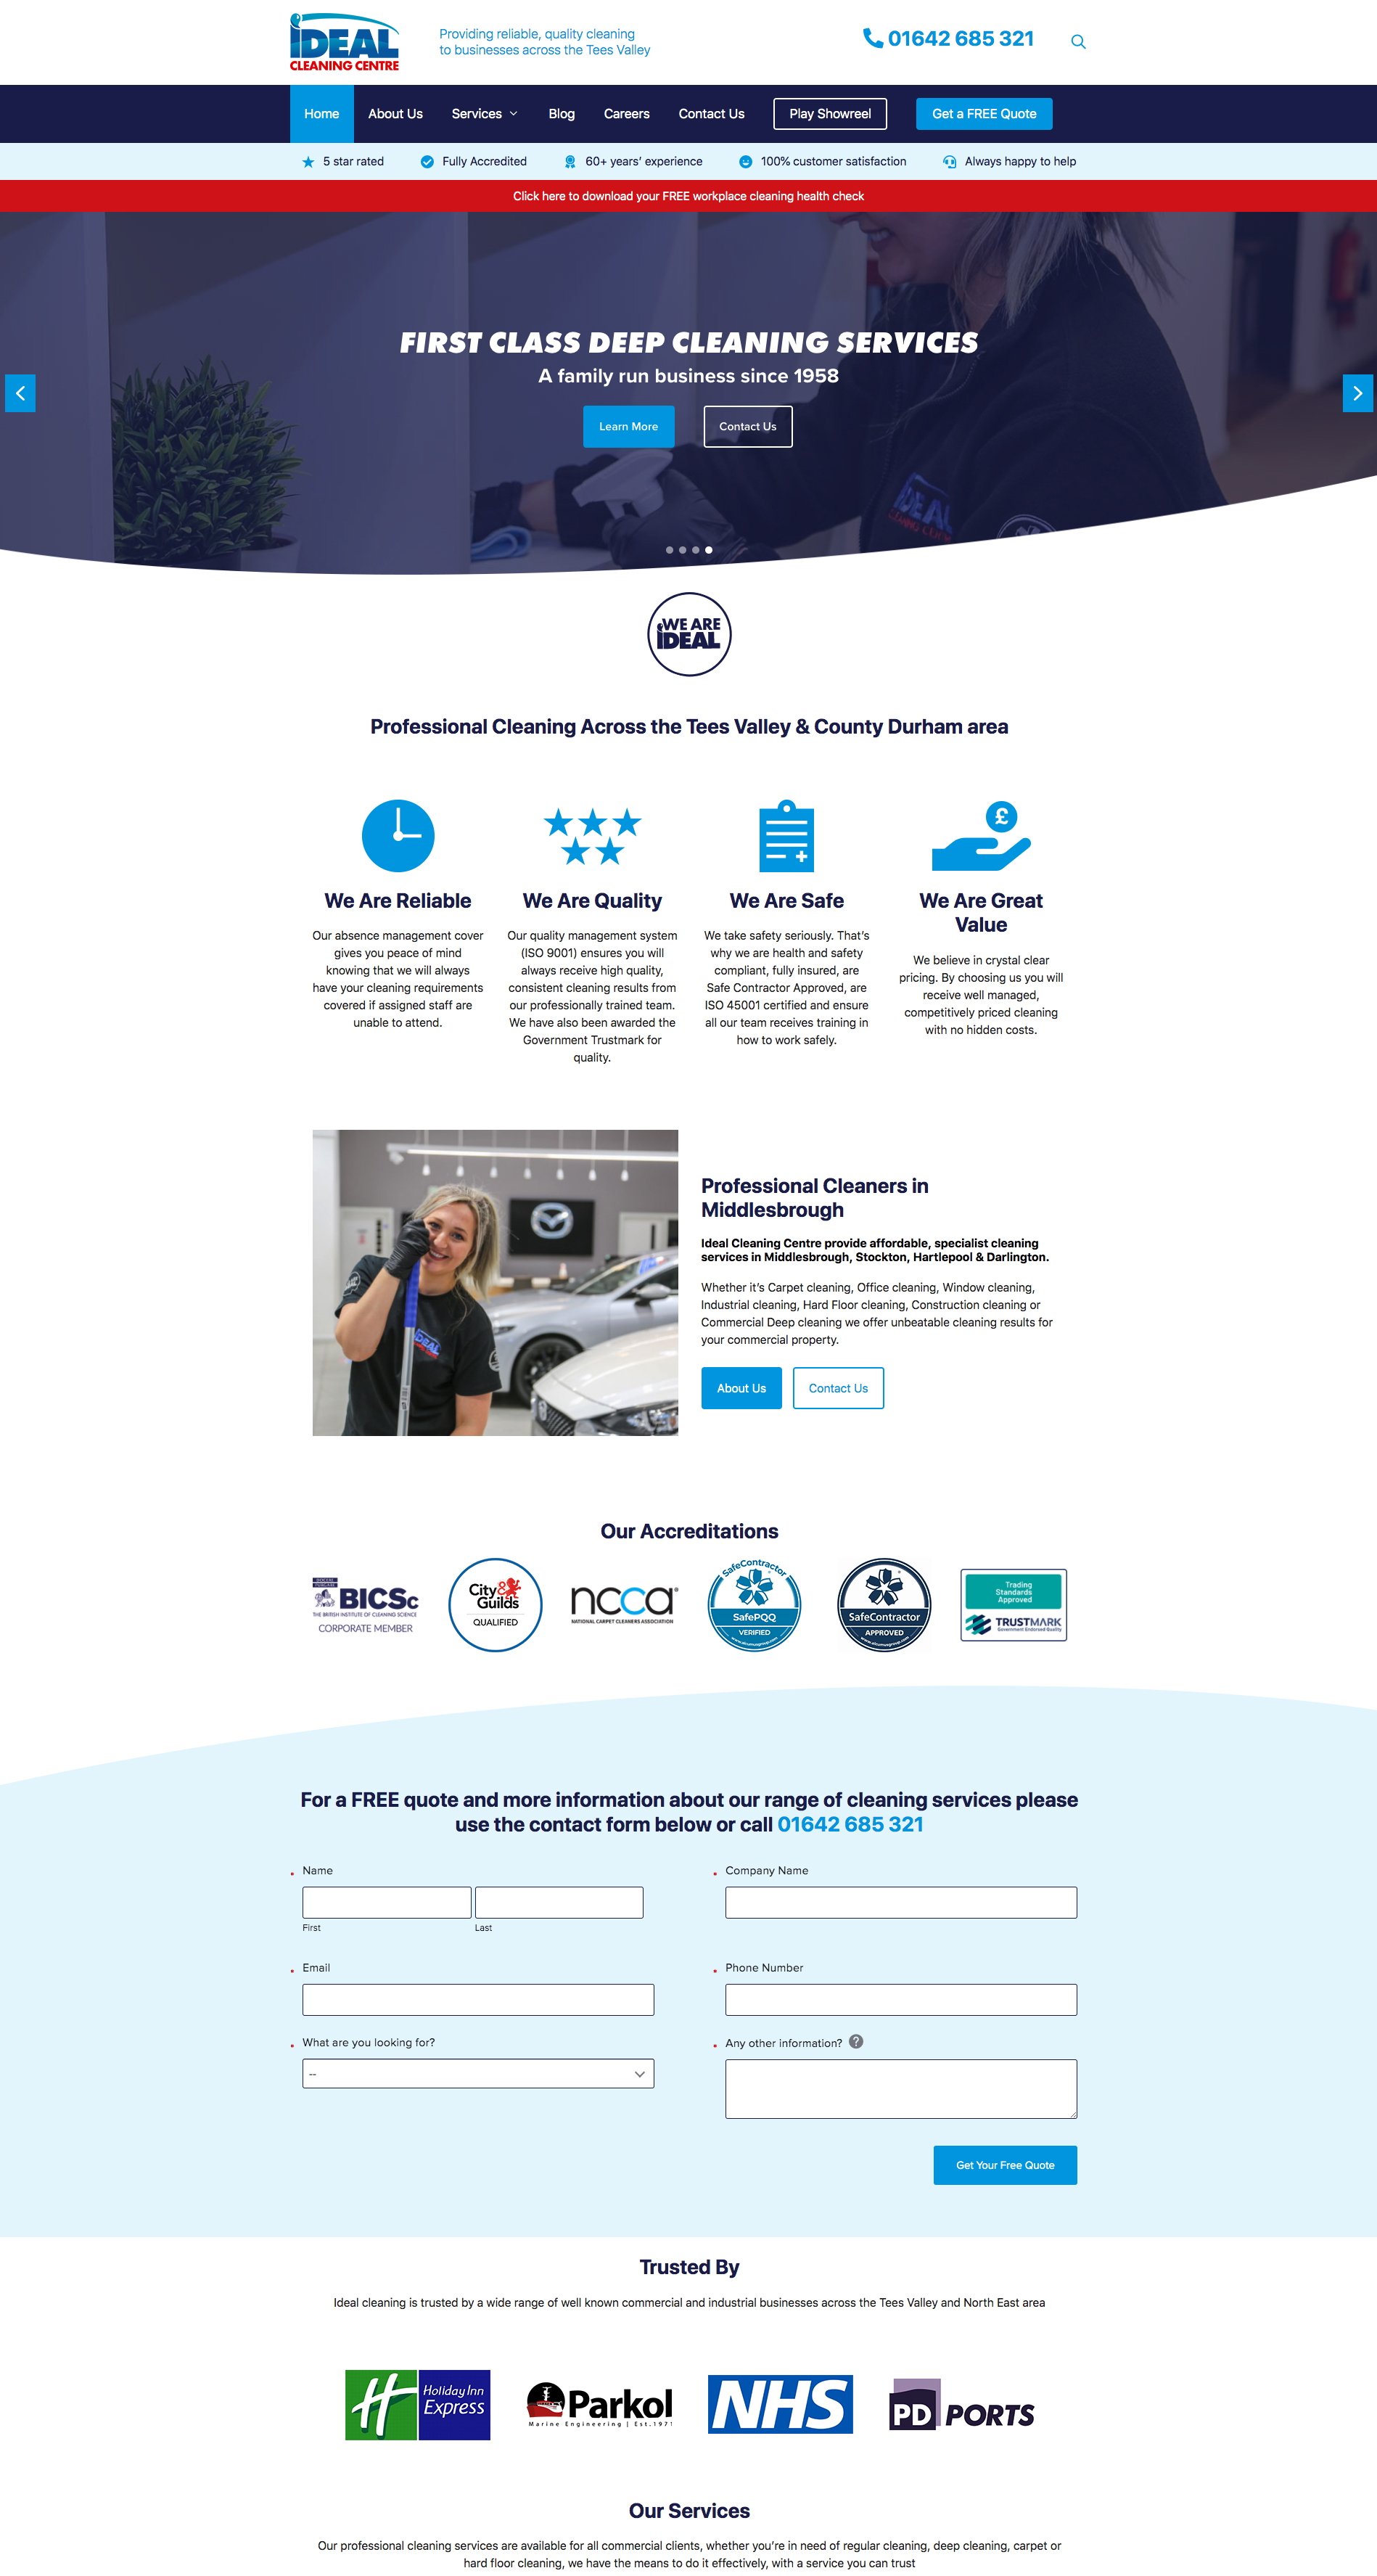 Ideal Cleaning Centre website case study wireframe